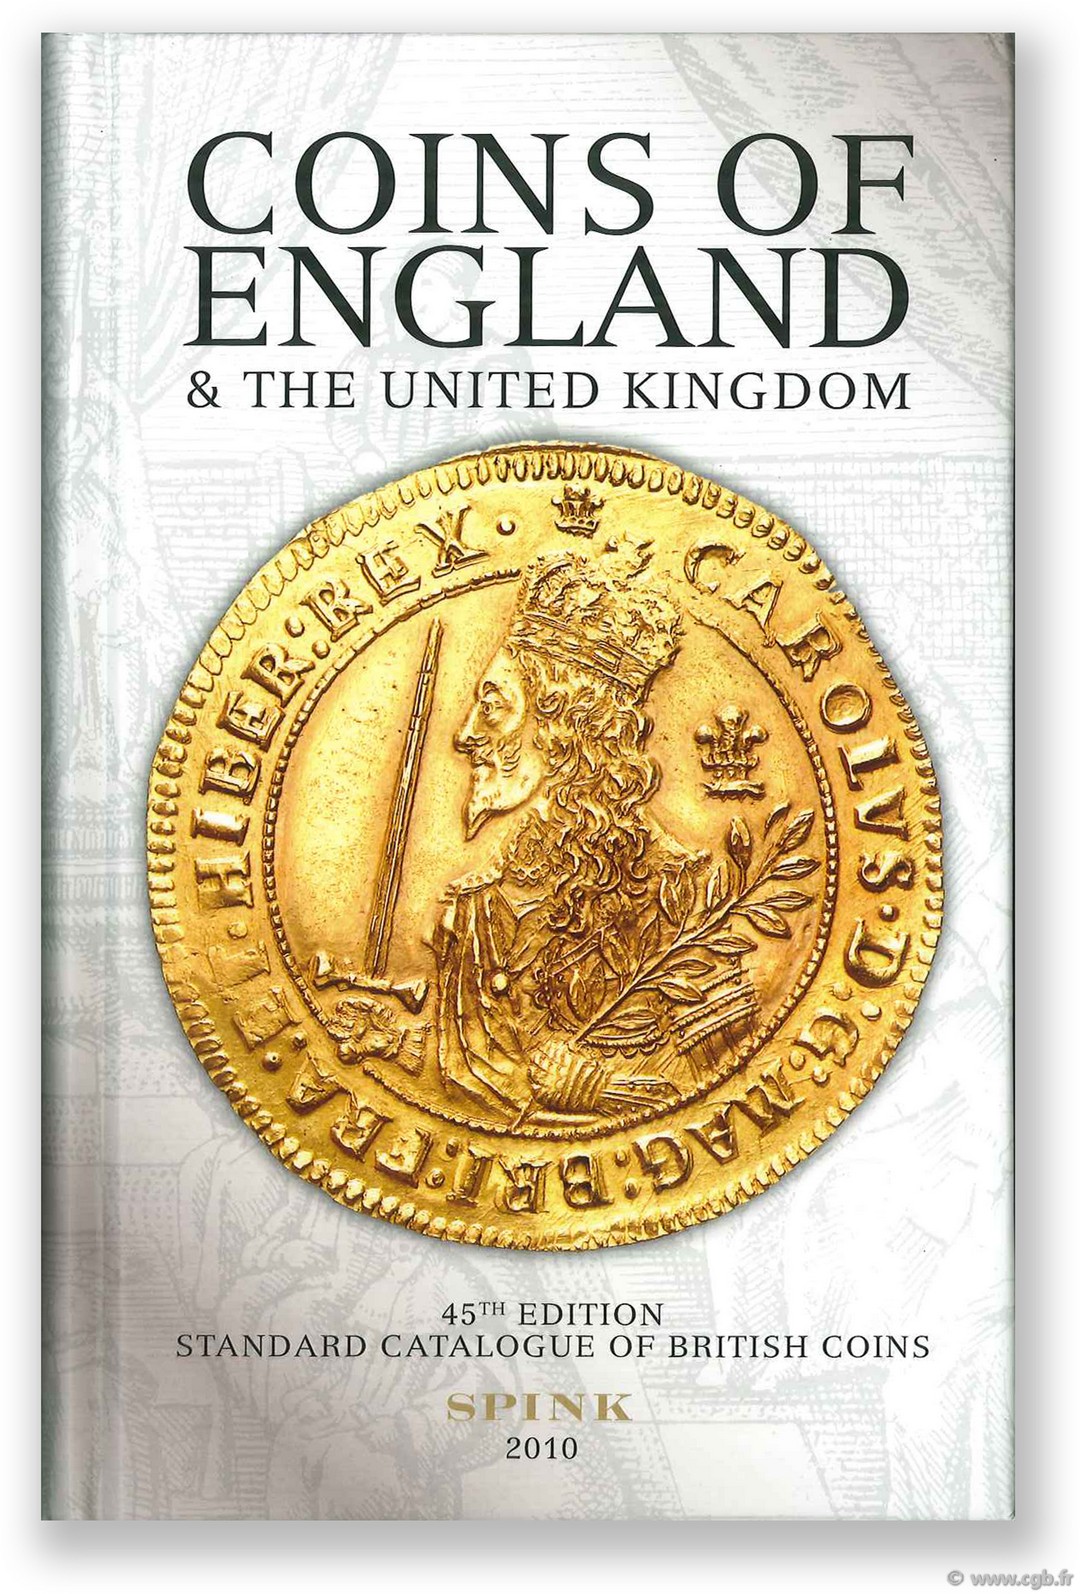 Coins of England and the United Kingdom, 45th edition - 2010 sous la direction de Philip Skingley